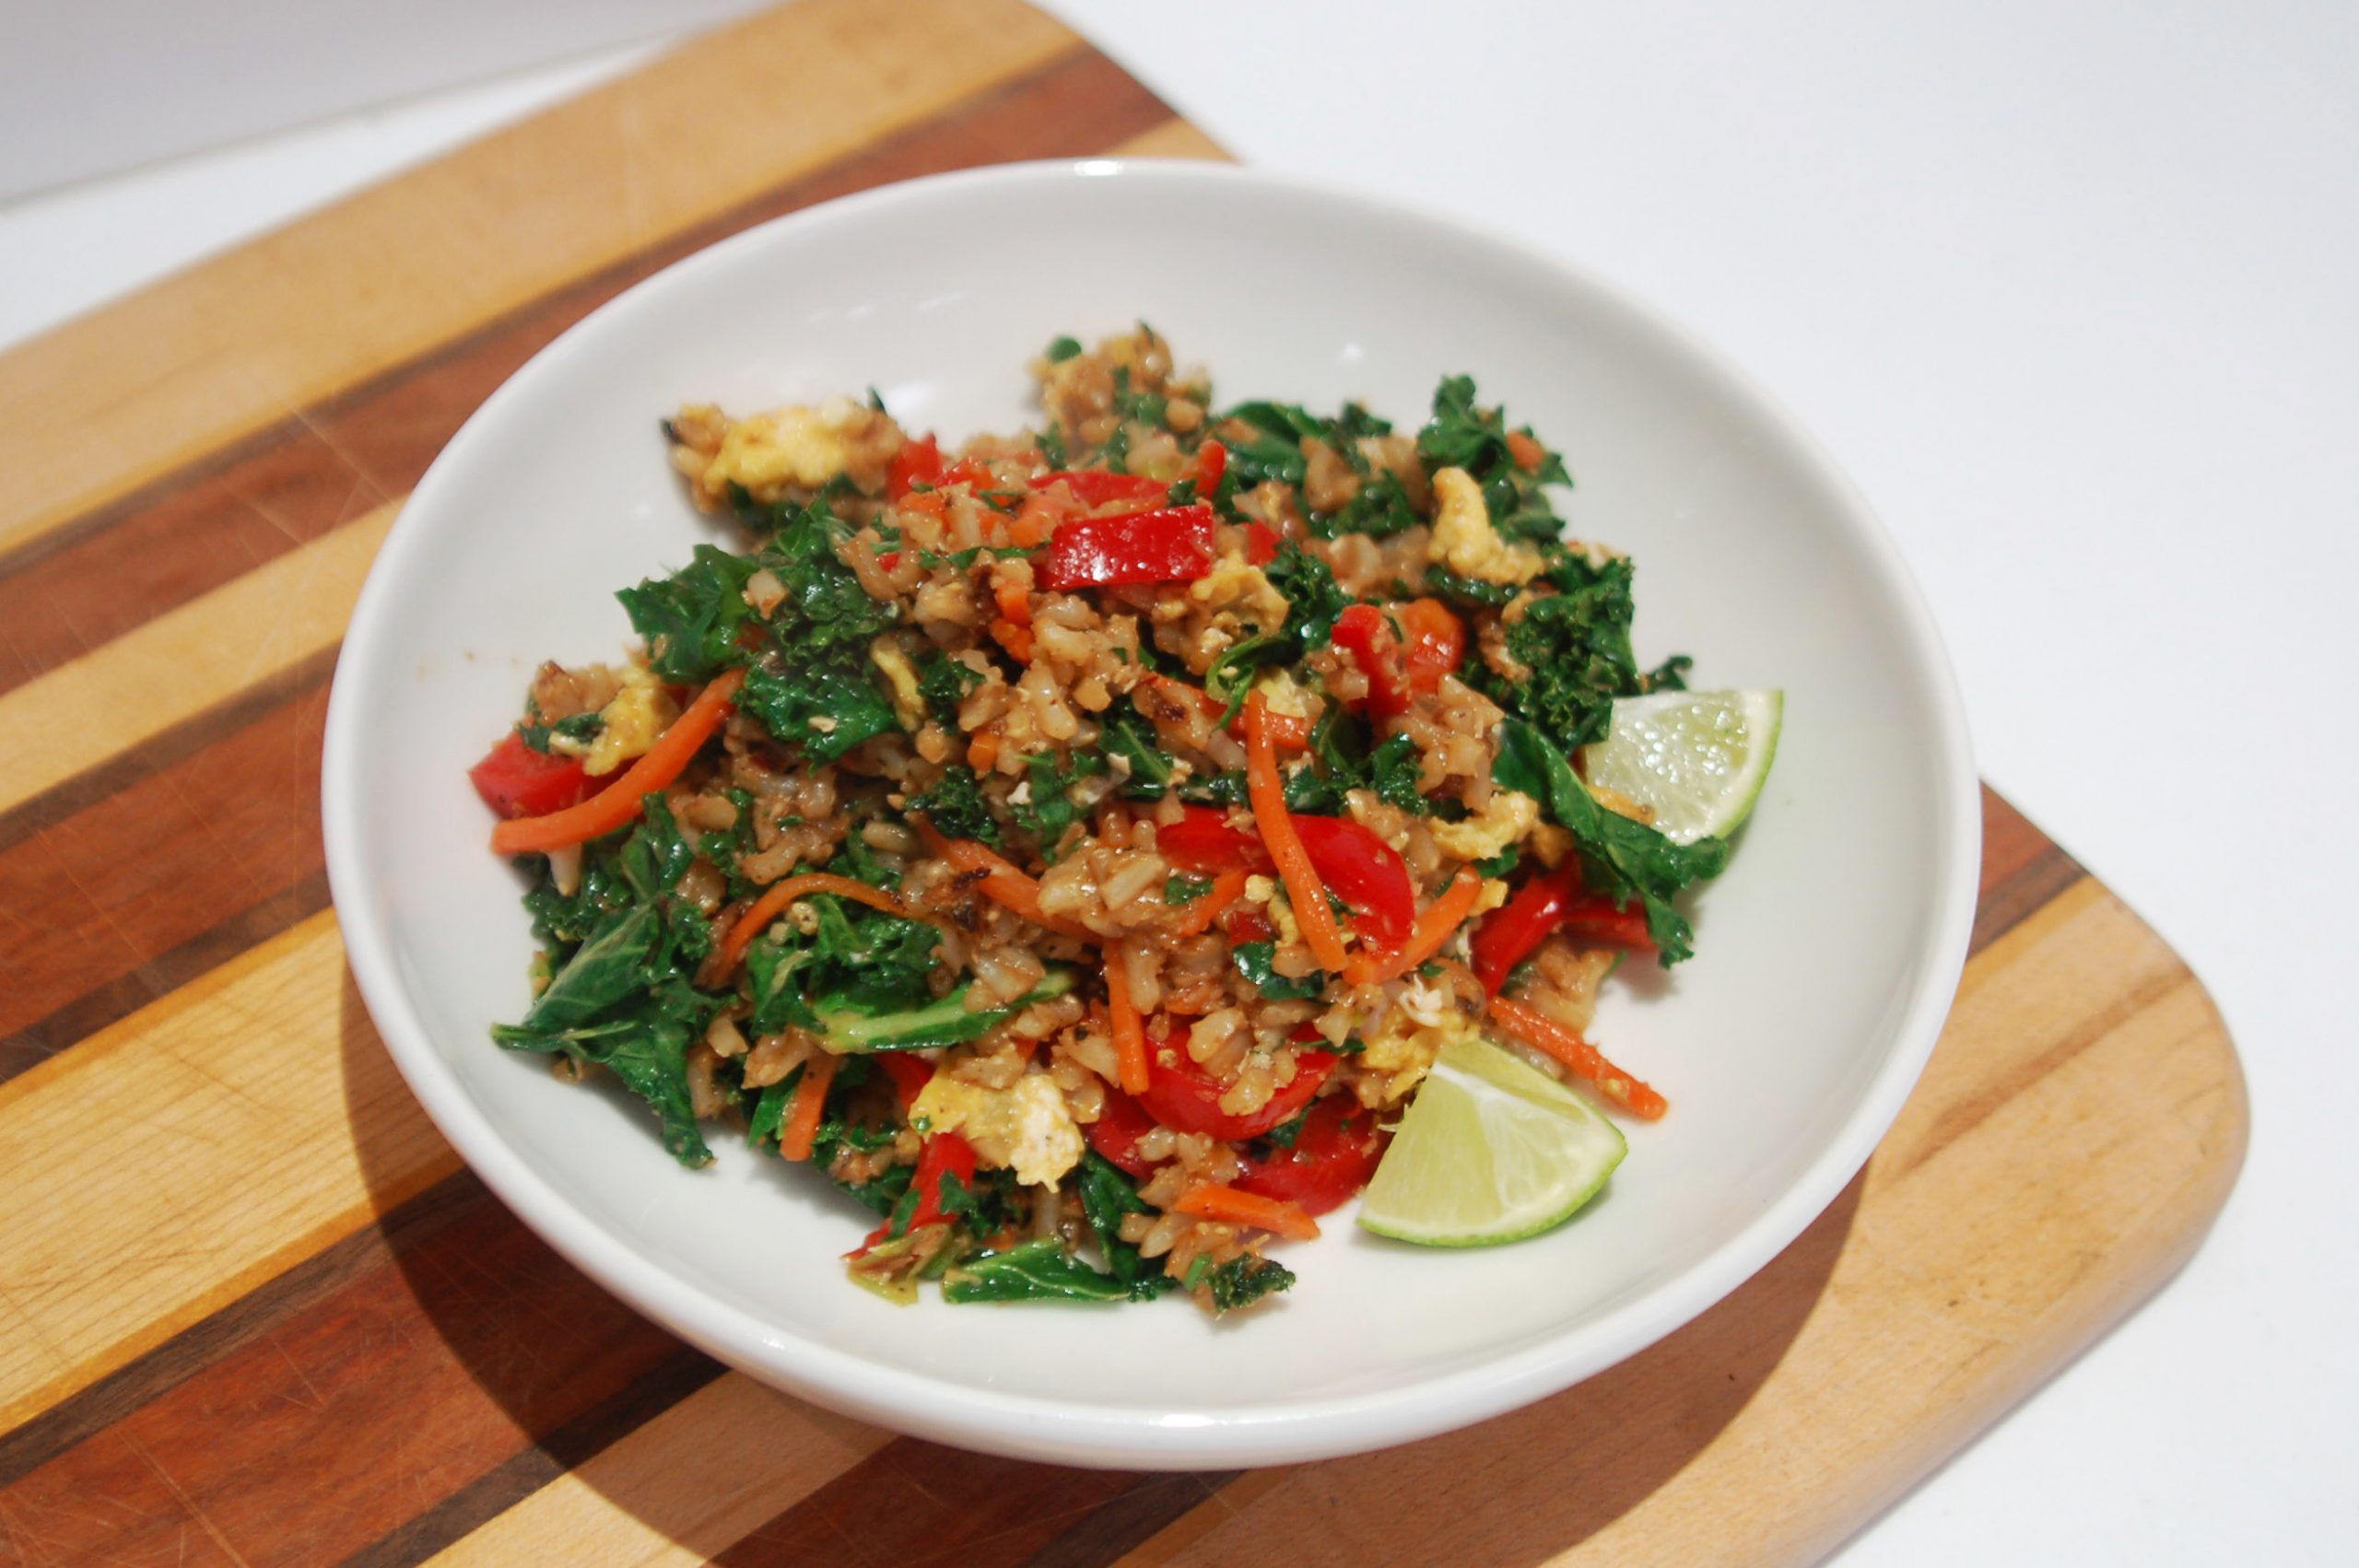 Spicy Kale and Coconut Fried Rice